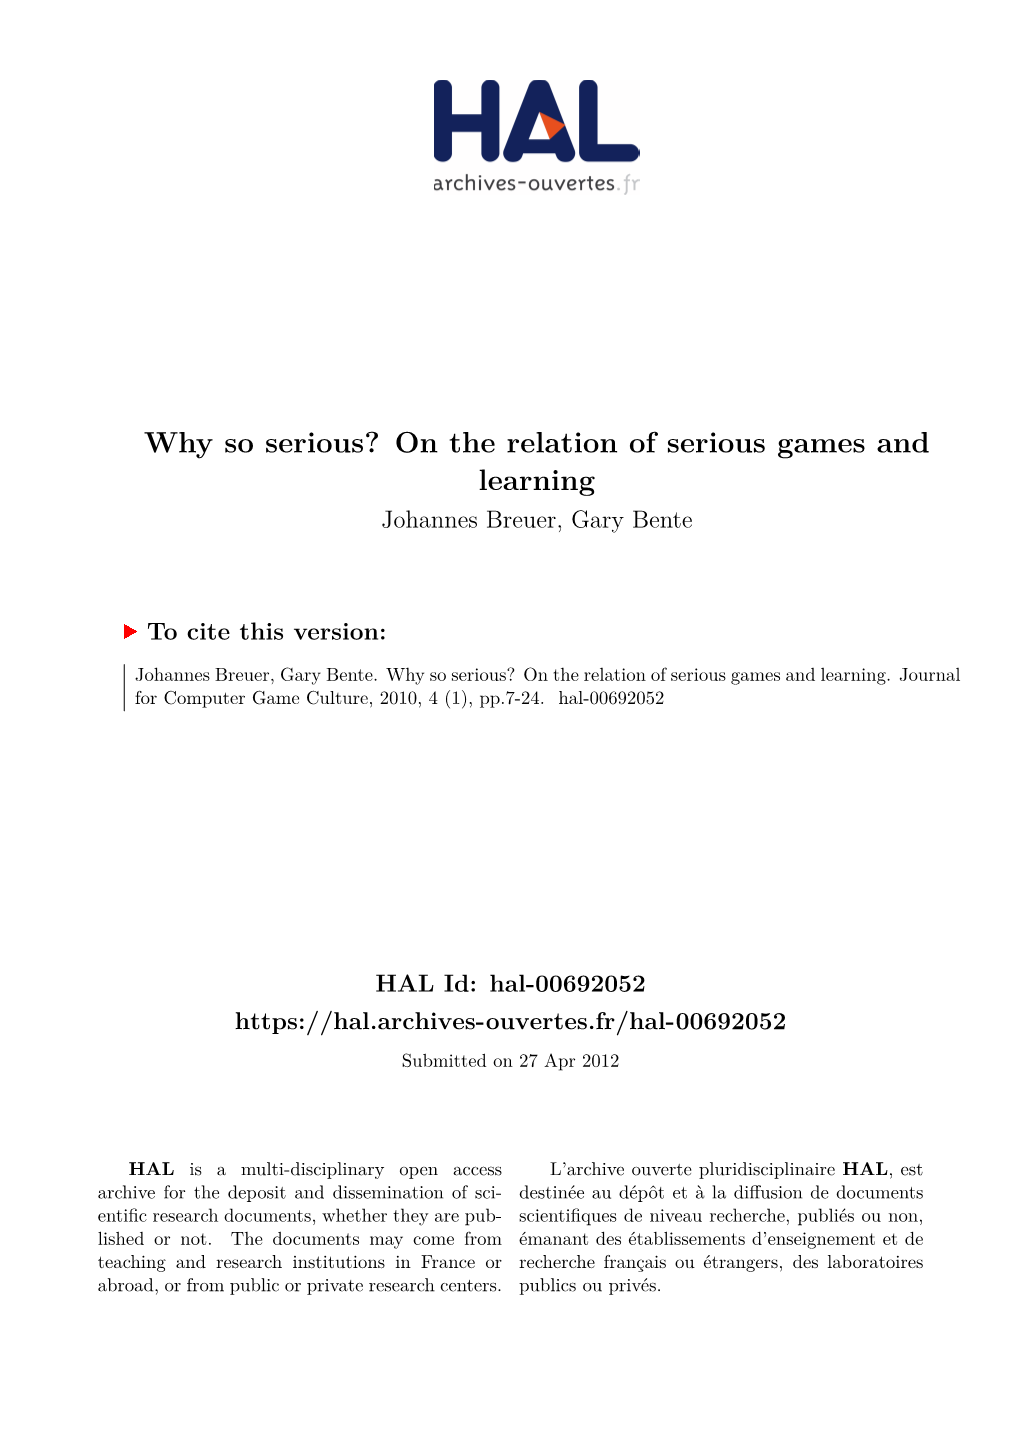 Why So Serious? on the Relation of Serious Games and Learning Johannes Breuer, Gary Bente